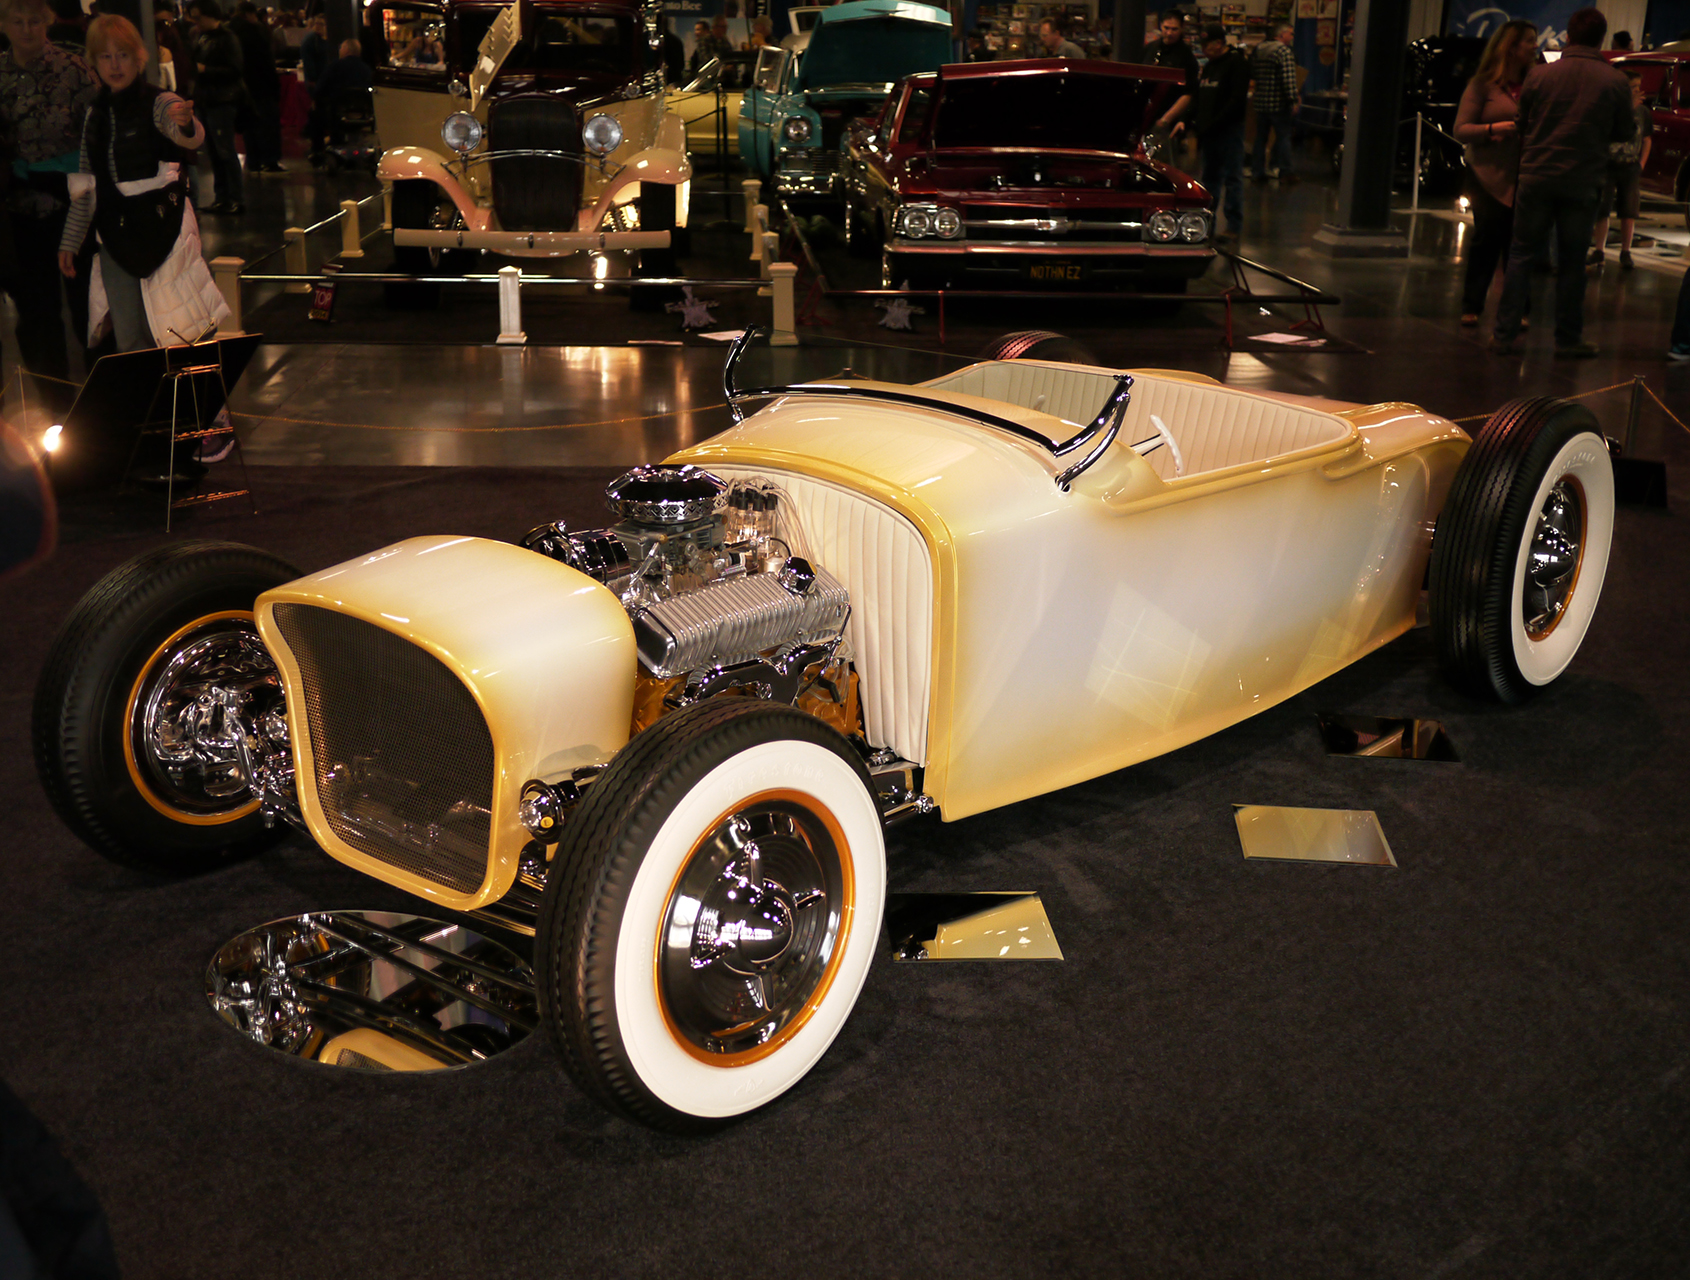  The fabulous Fools Goldster. Matt Taylor's '27 Dodge roadster. Small boys and grown men were seen gazing at it with mouths agape. 